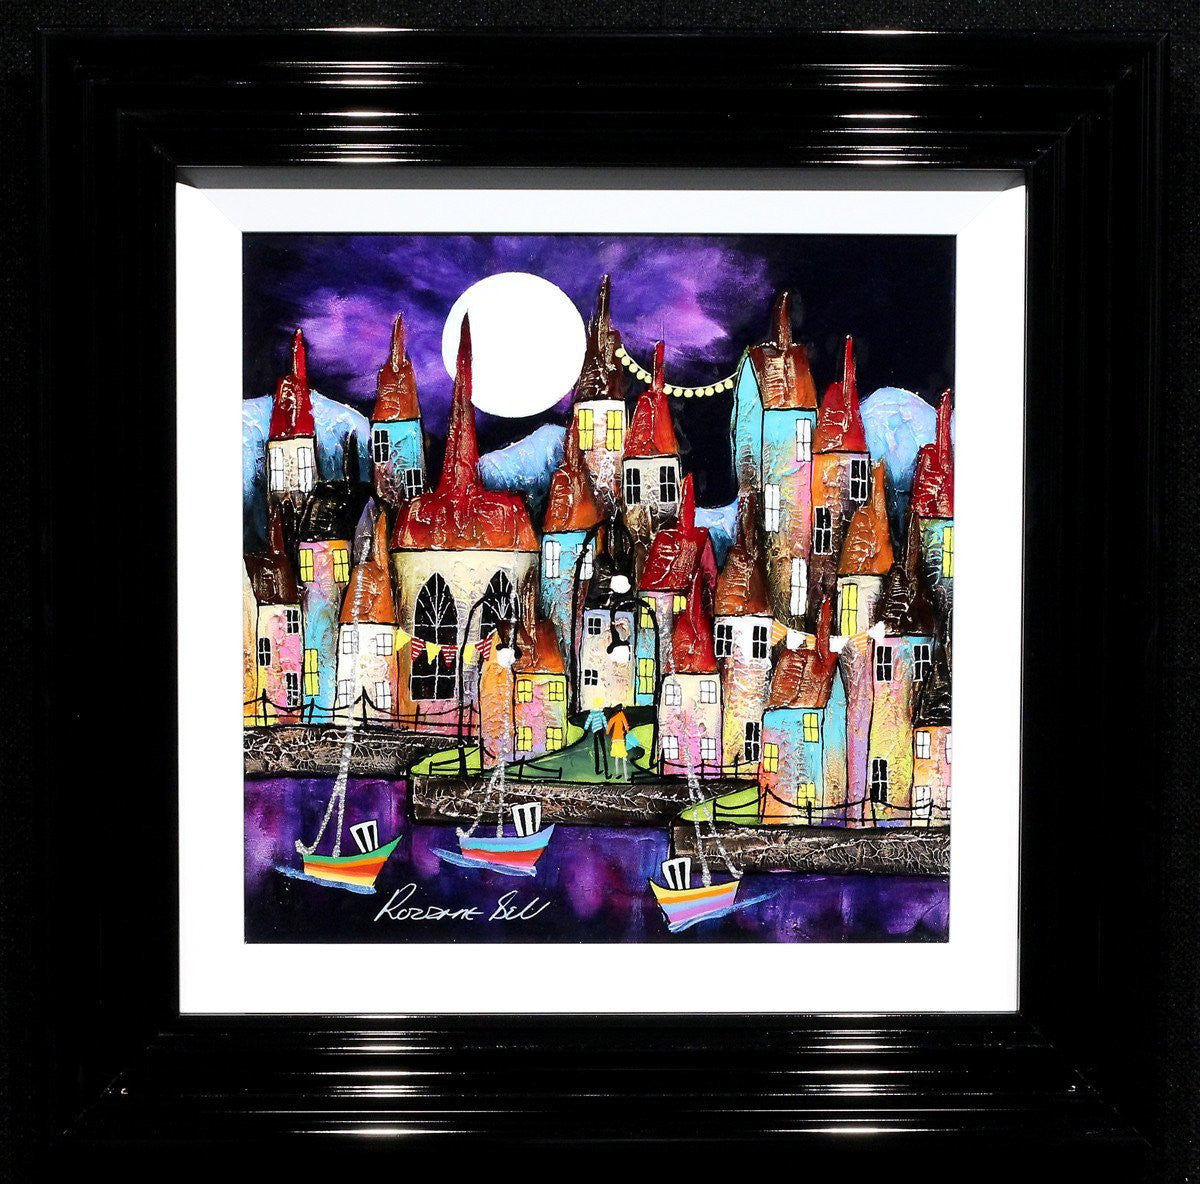 Moonlight Sailing - SOLD Rozanne Bell